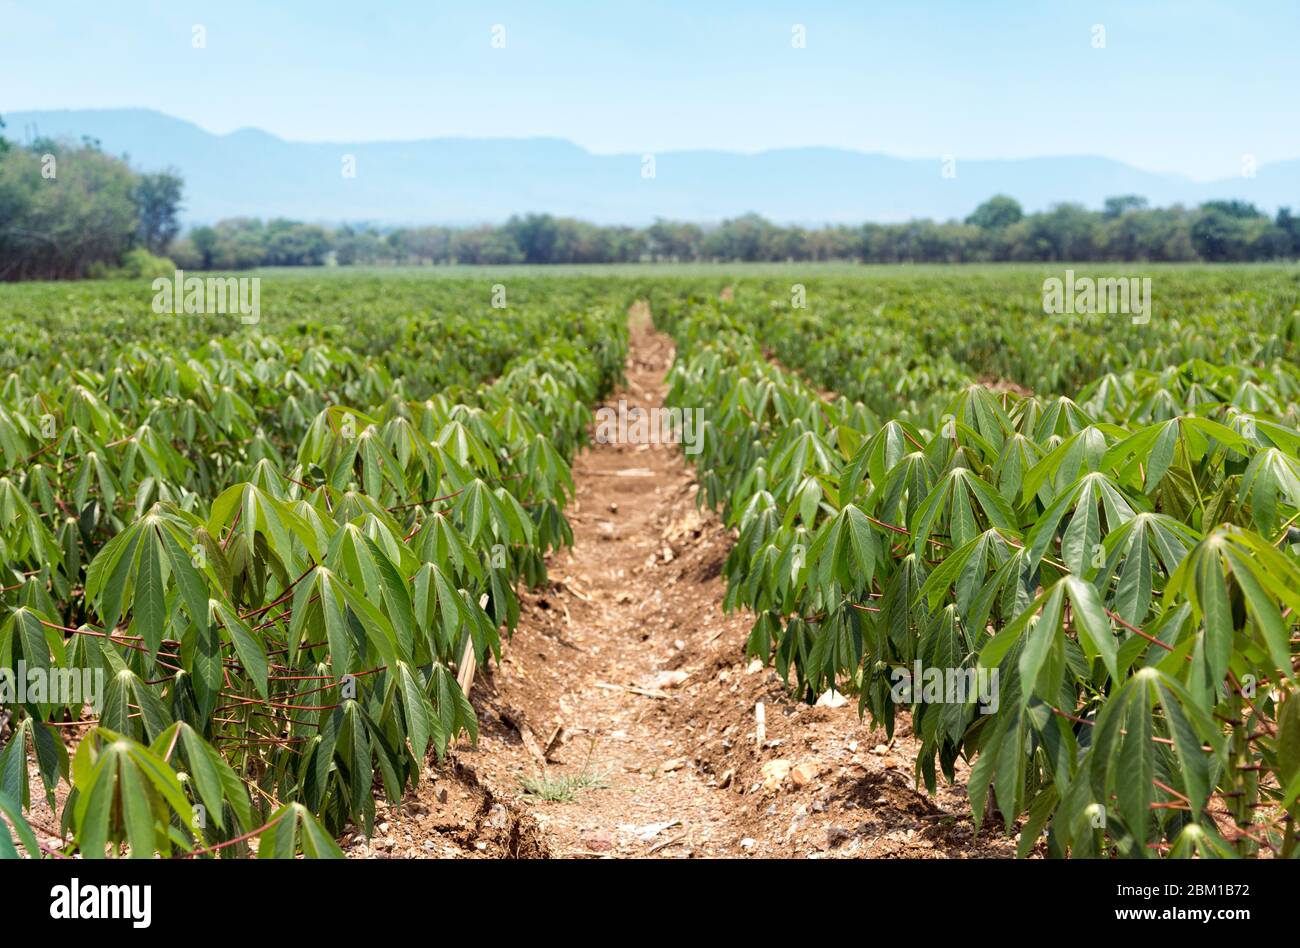 organic cassava field at rural agriculture landscape Stock Photo